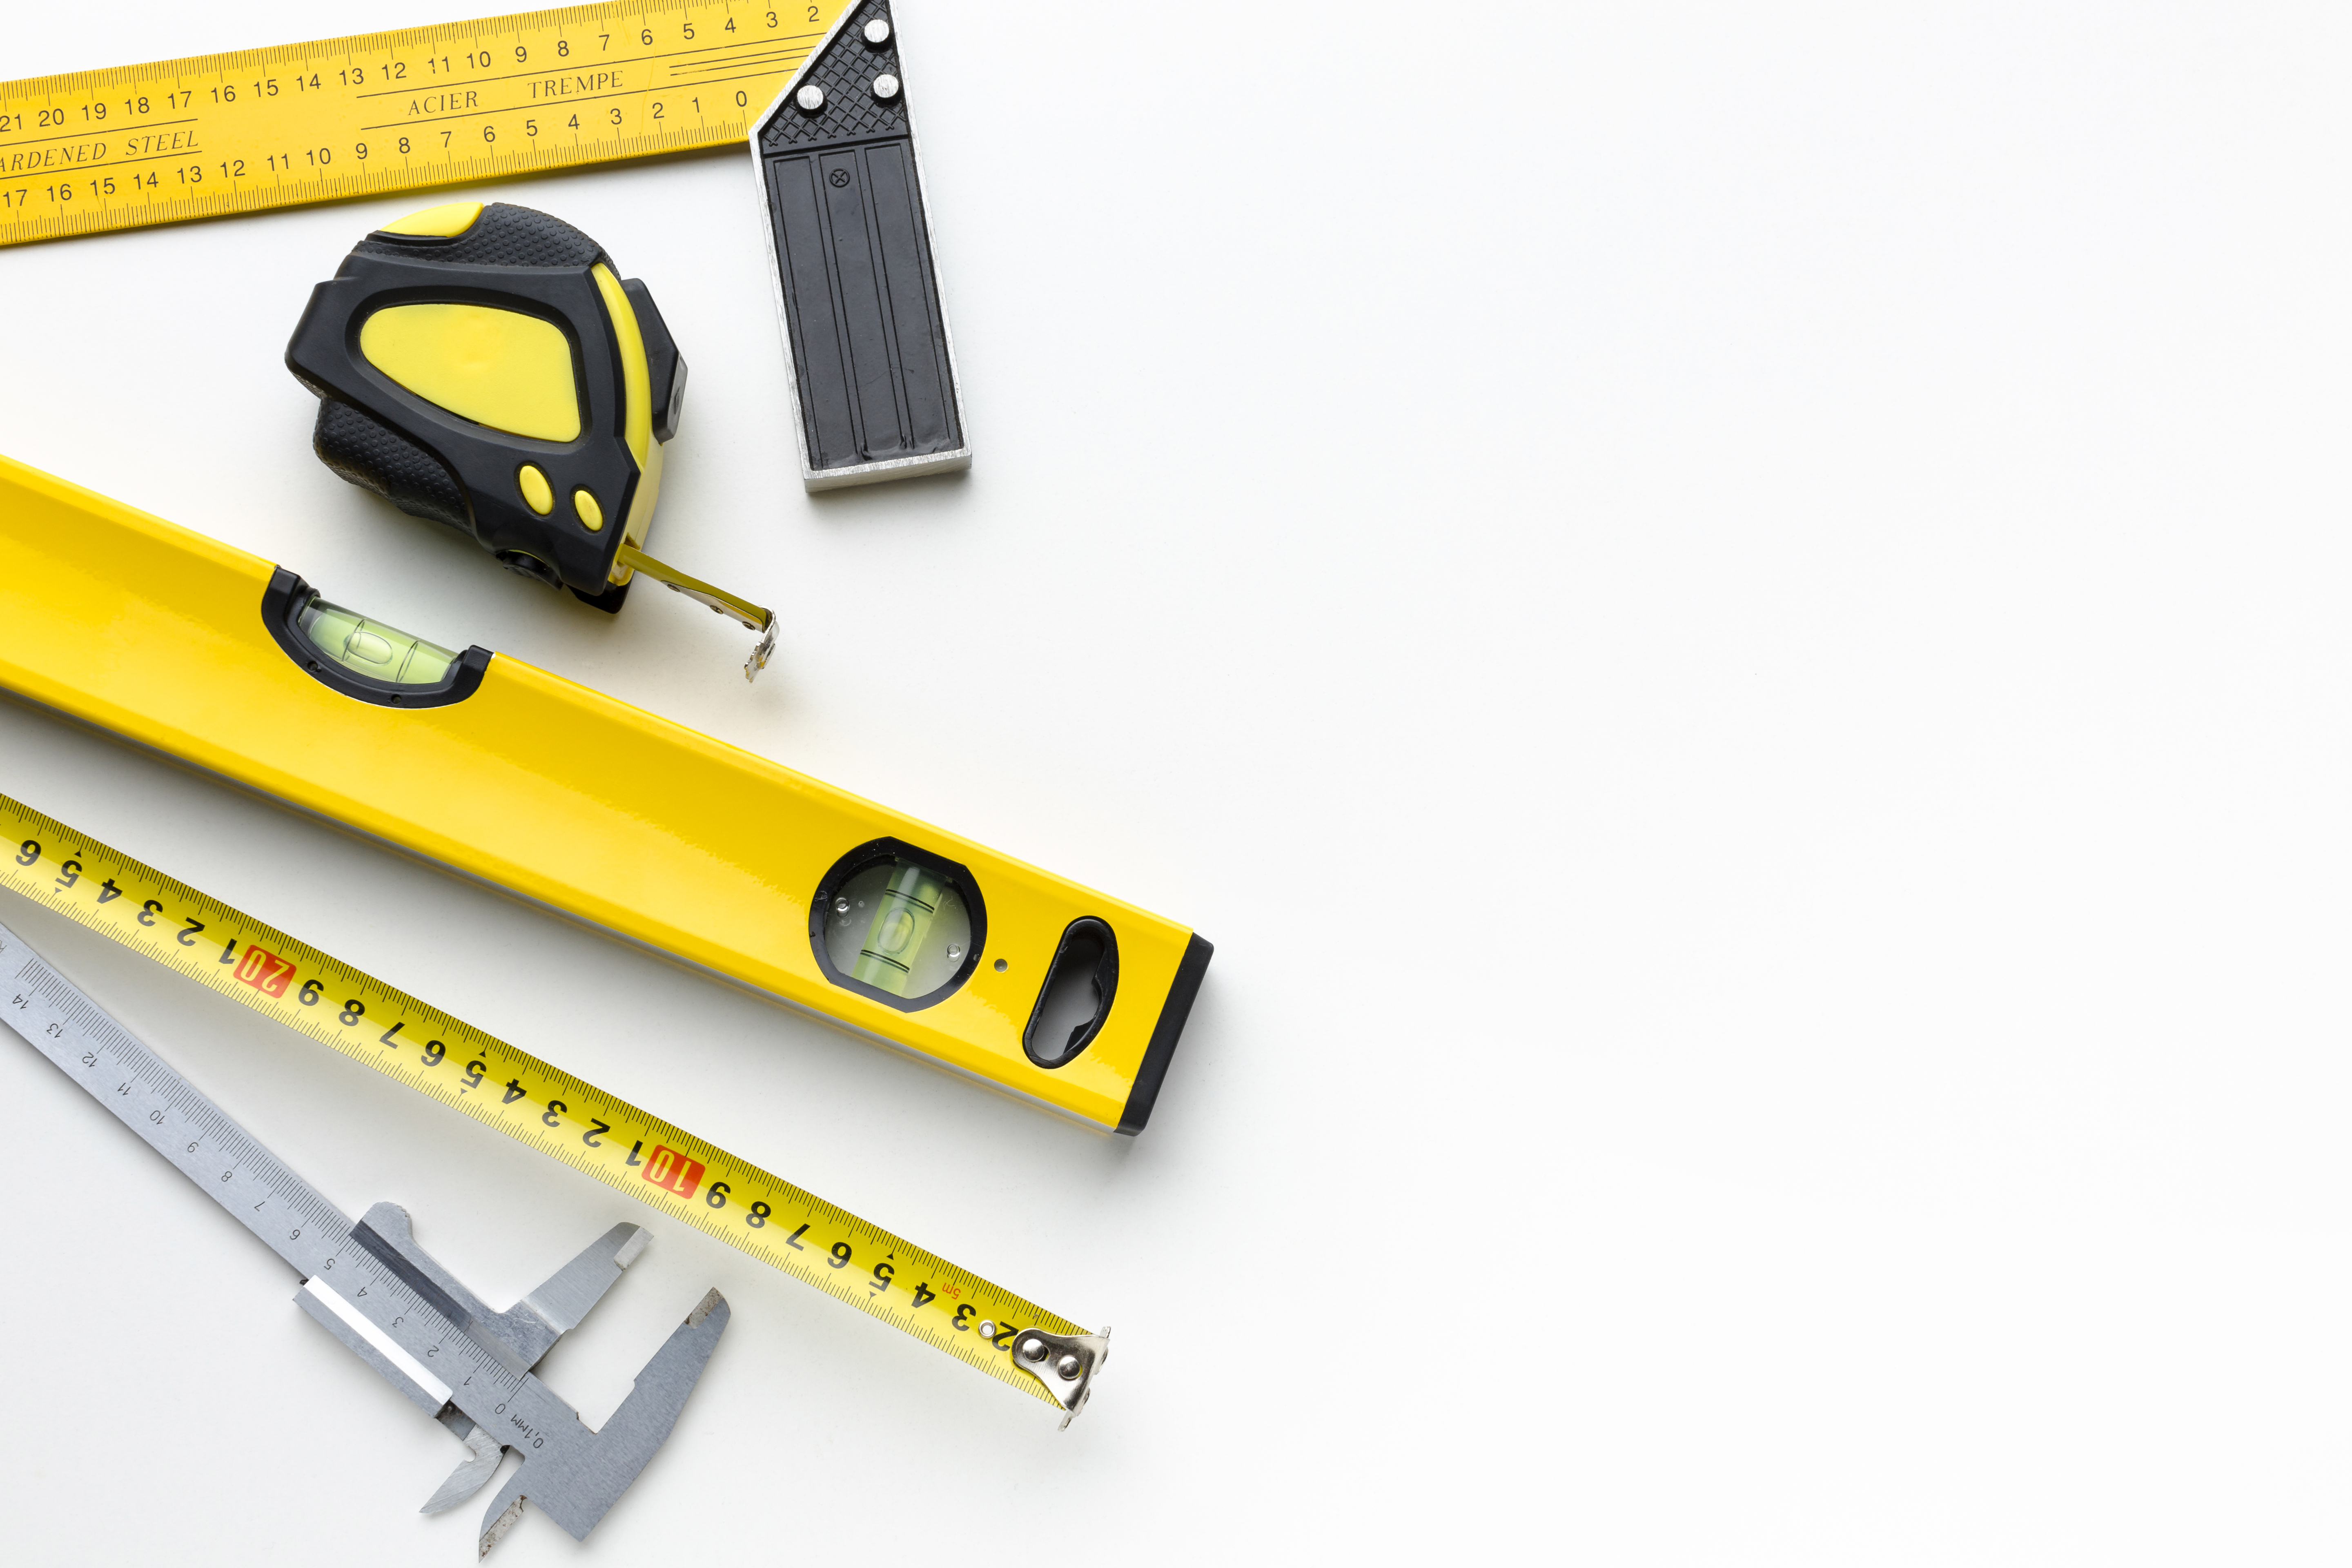 Yellow repair tools arranged on a surface with copy space